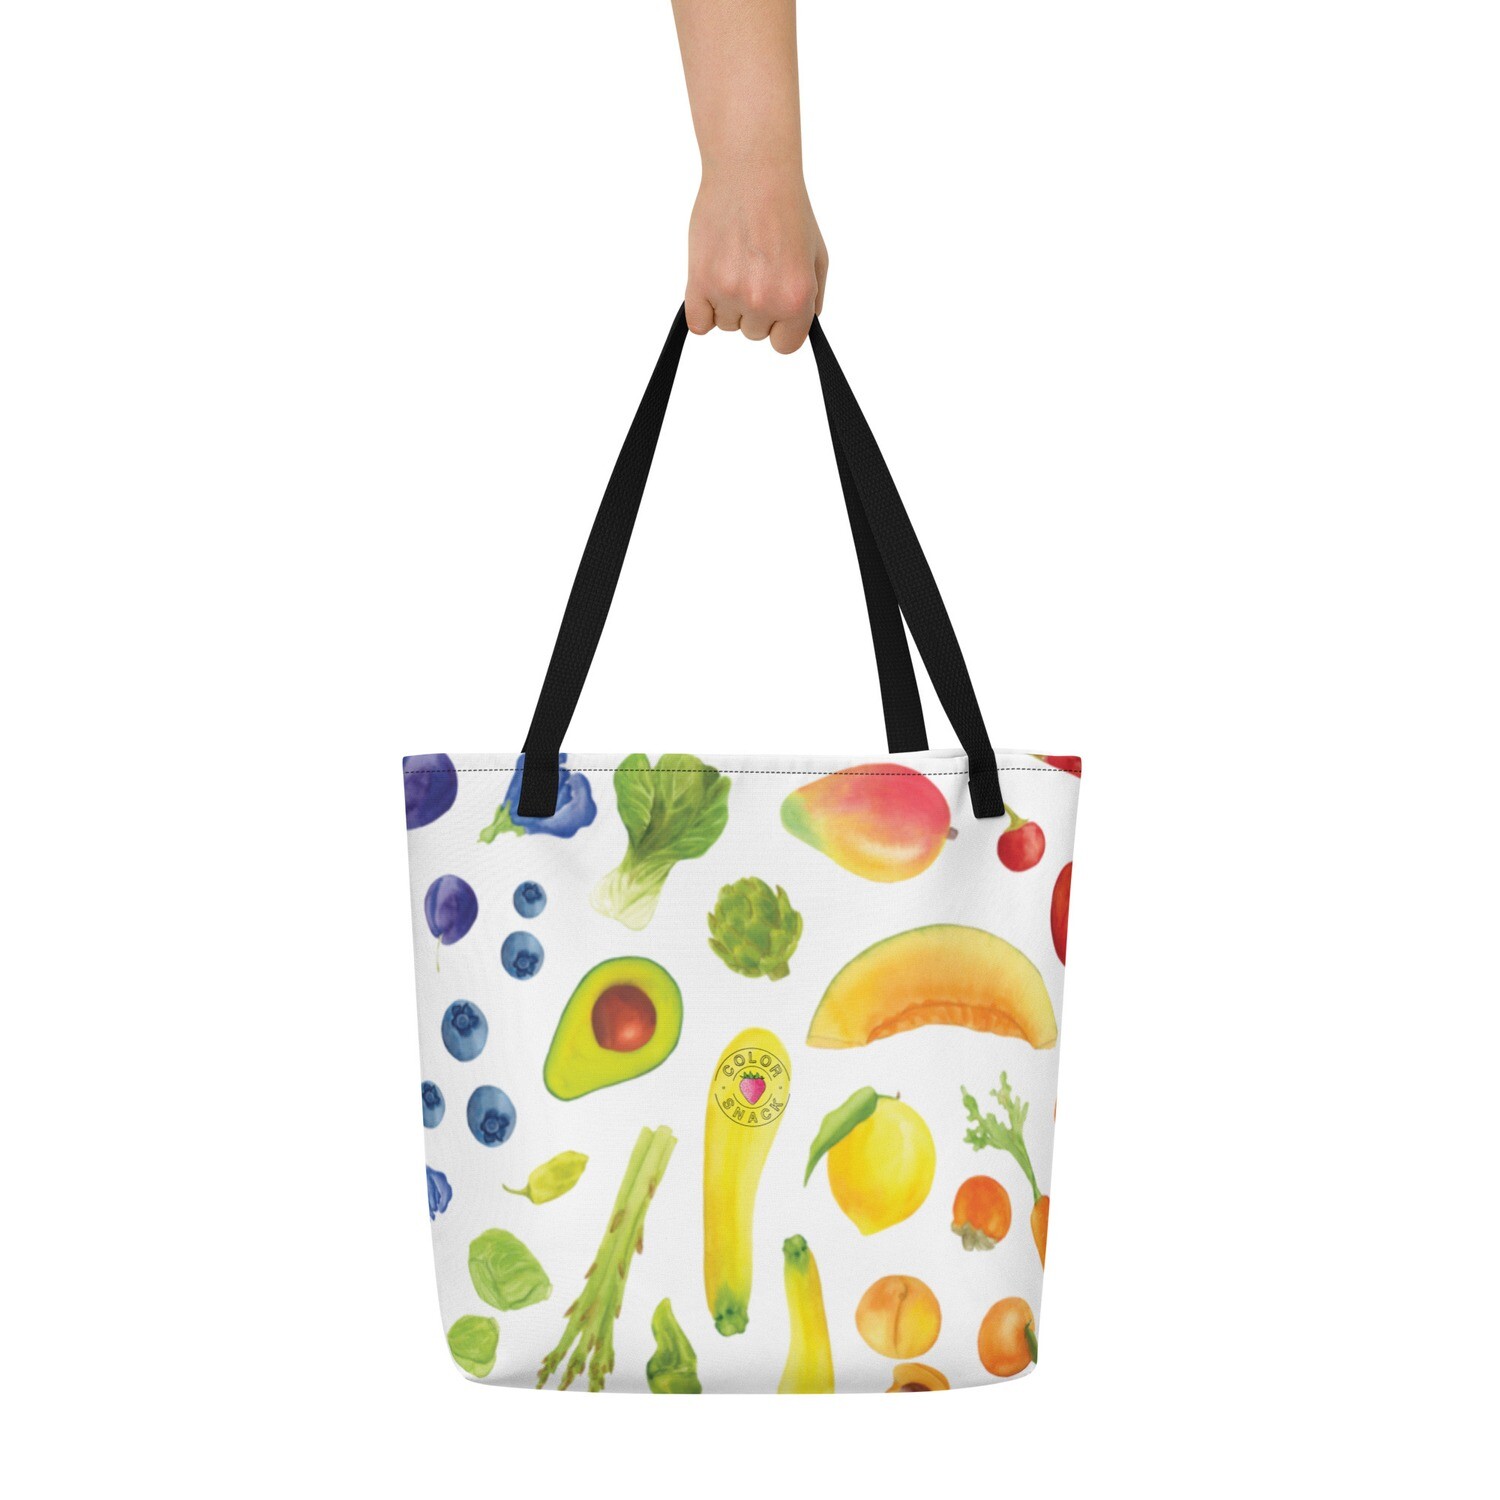 All-Over Print Large Tote Bag - Eat The Rainbow - Veggies